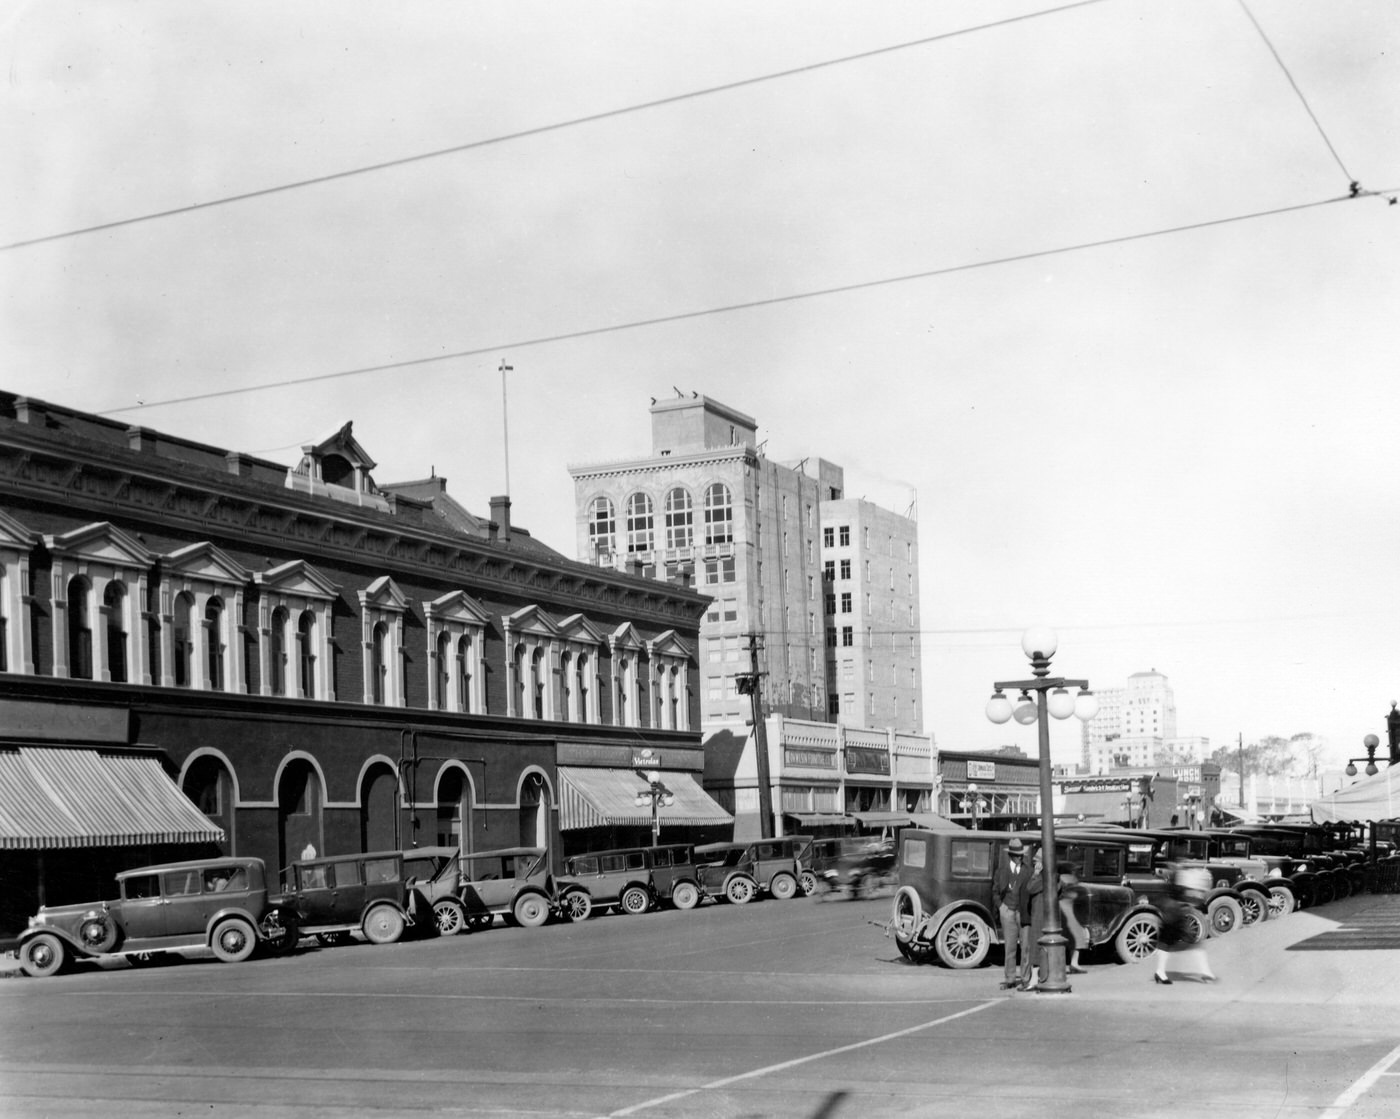 First Street and Washington looking north with the Anderson Building on the left in 1928.